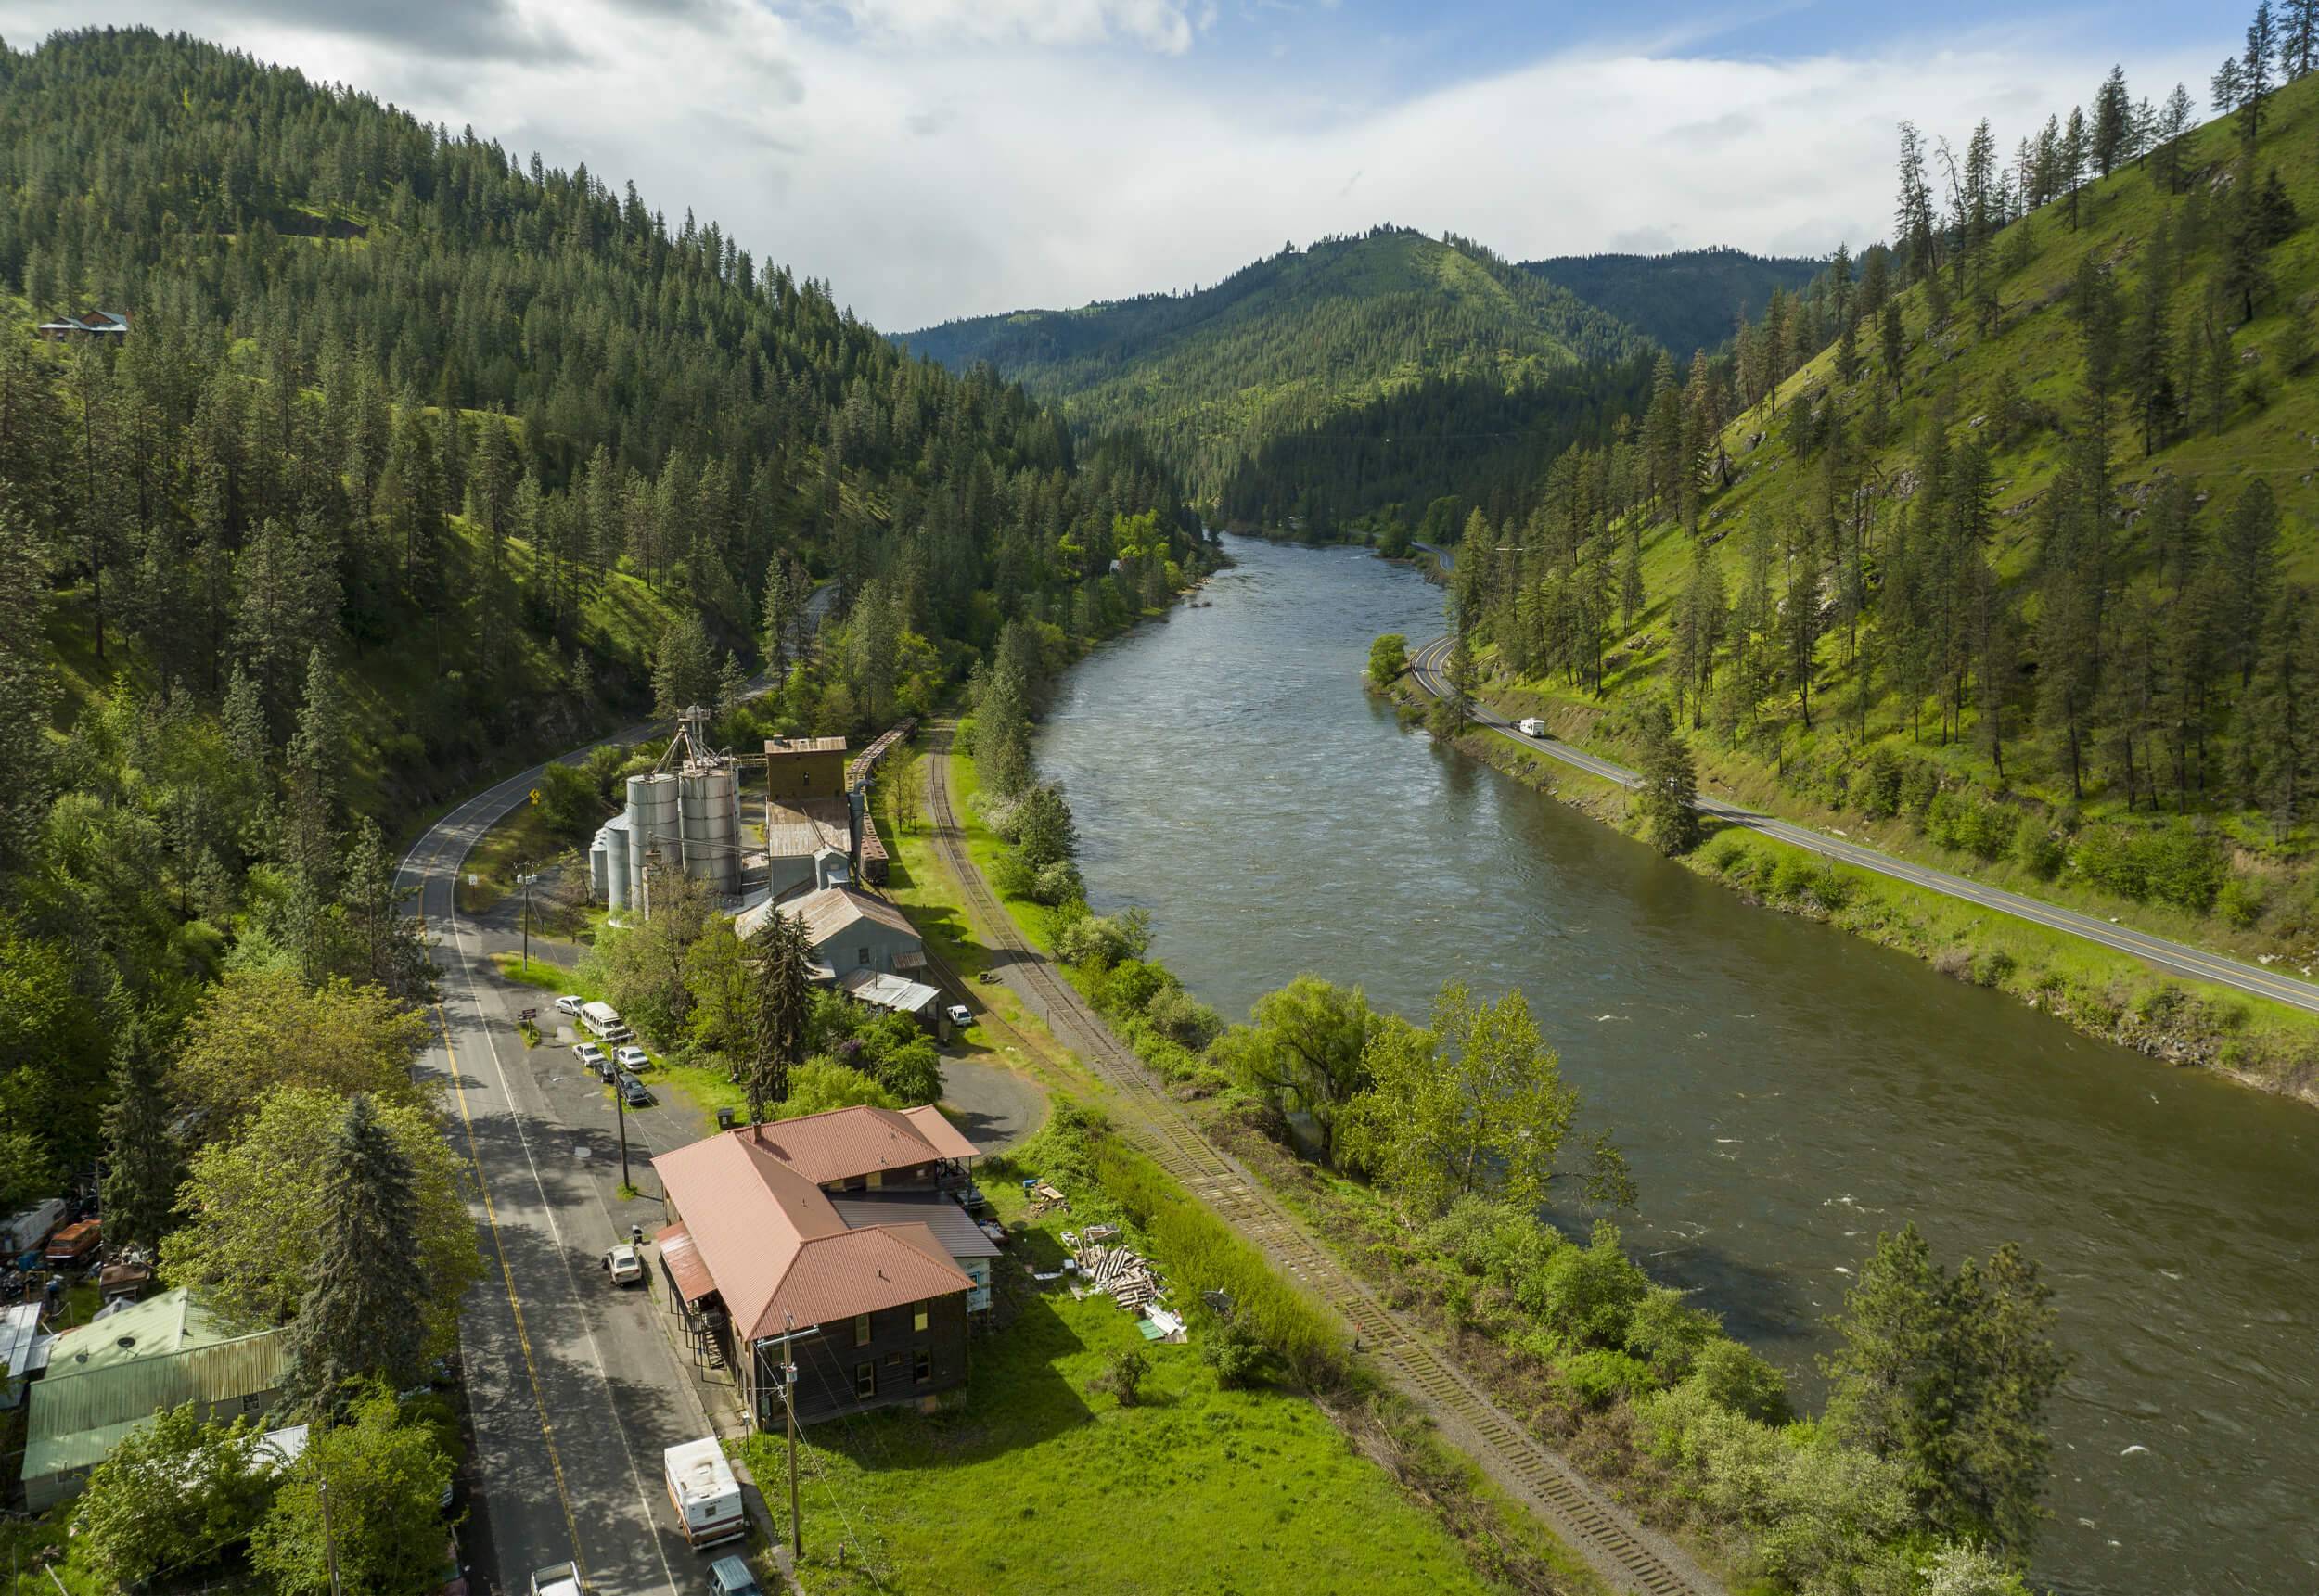 An aerial view of the Clearwater River winding through tree-covered mountains